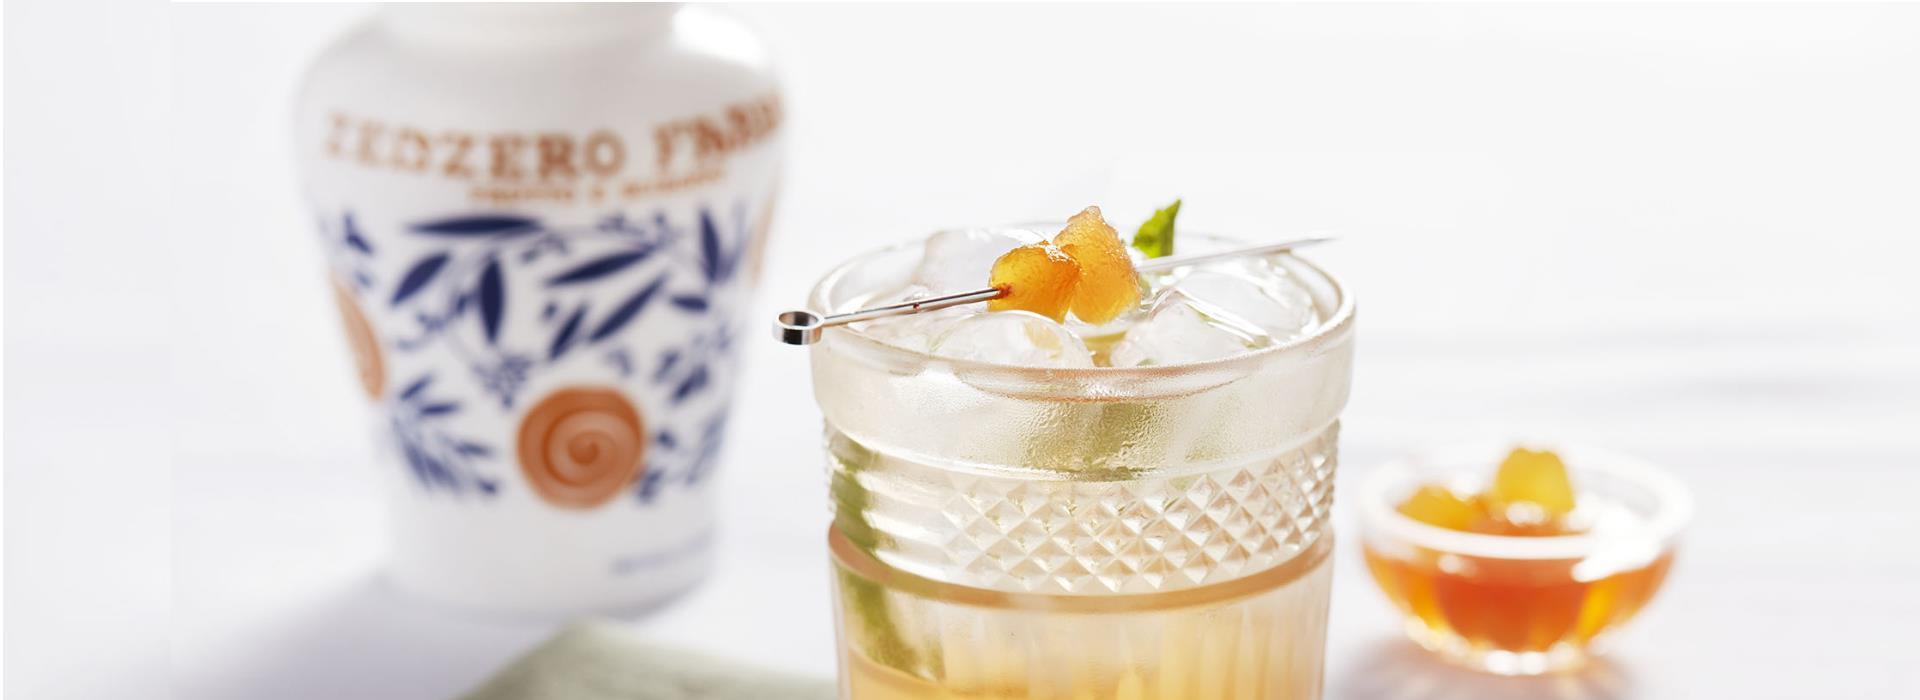 Try the lemonade with Zenzero Fabbri, for a refreshing break with an exotic taste